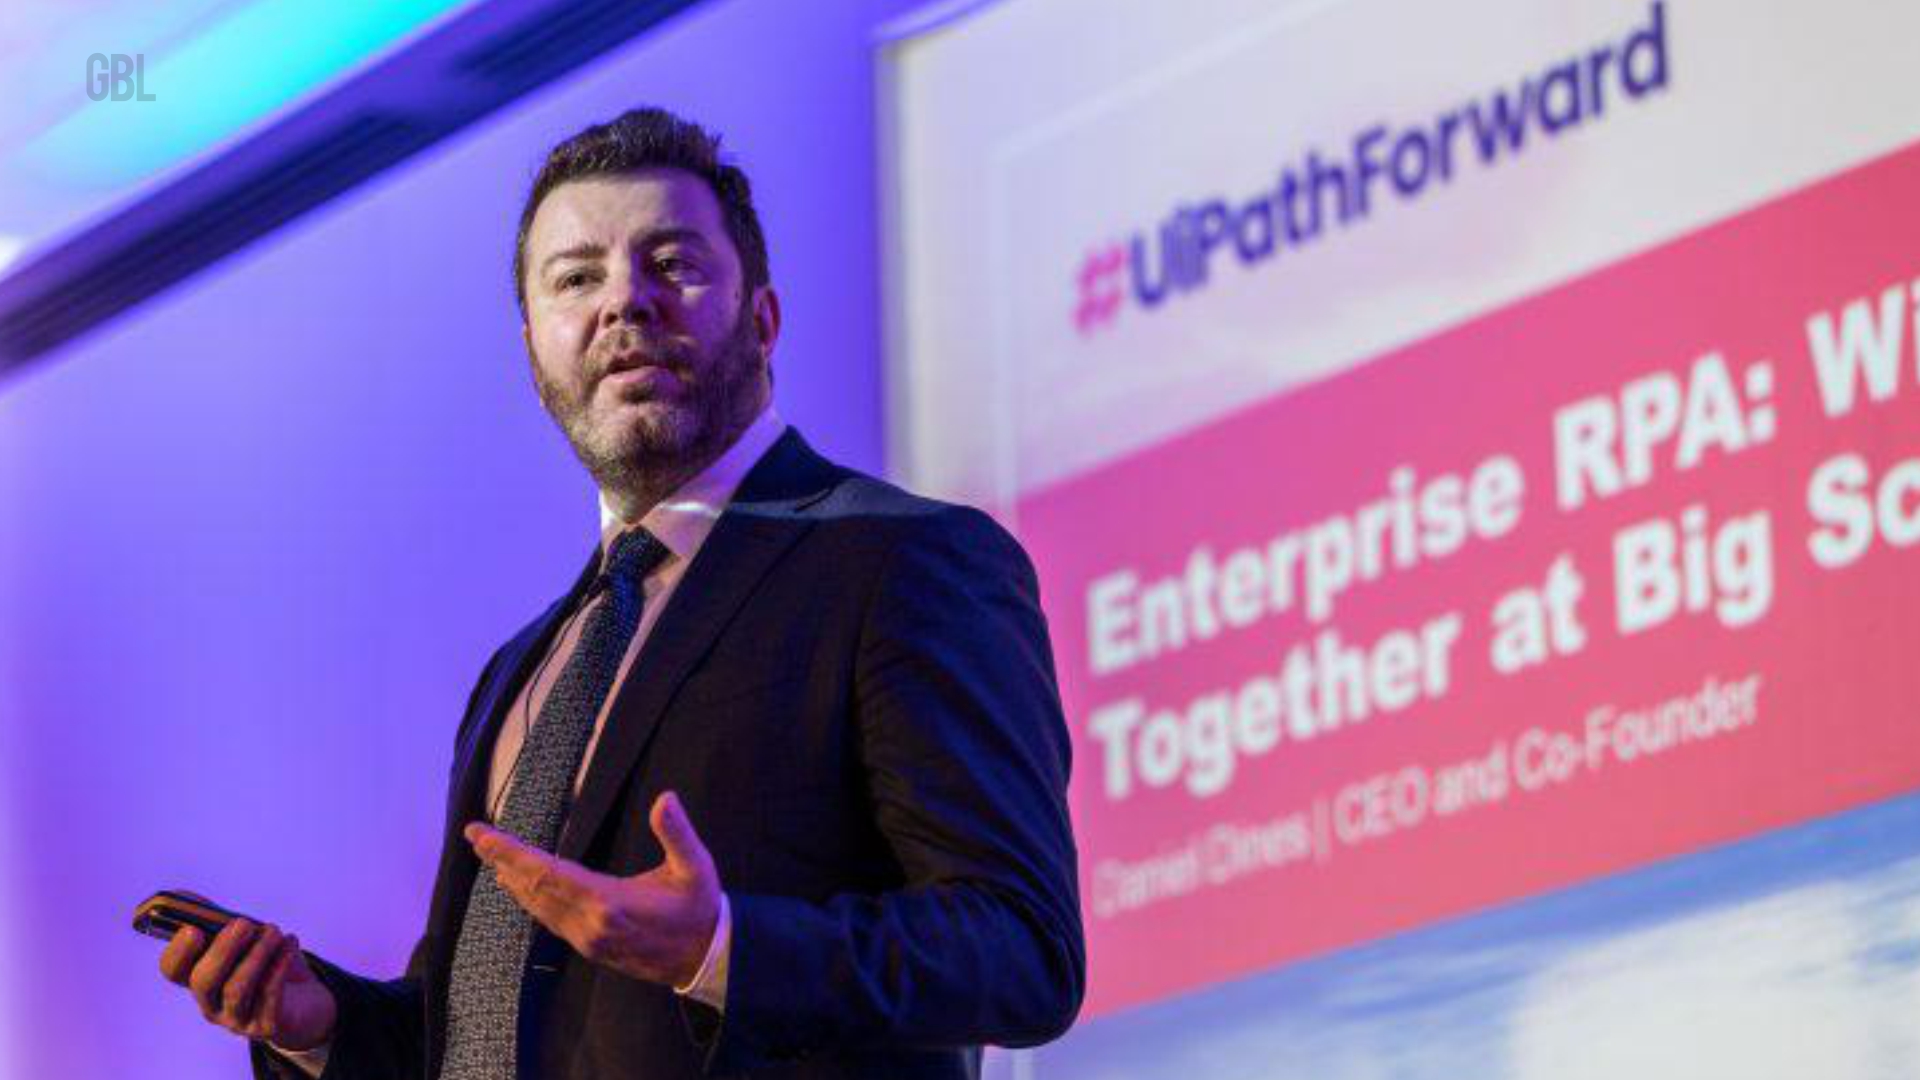 UIPath CEO Daniel Dines is coming to TC Sessions: SaaS to talk RPA and automation